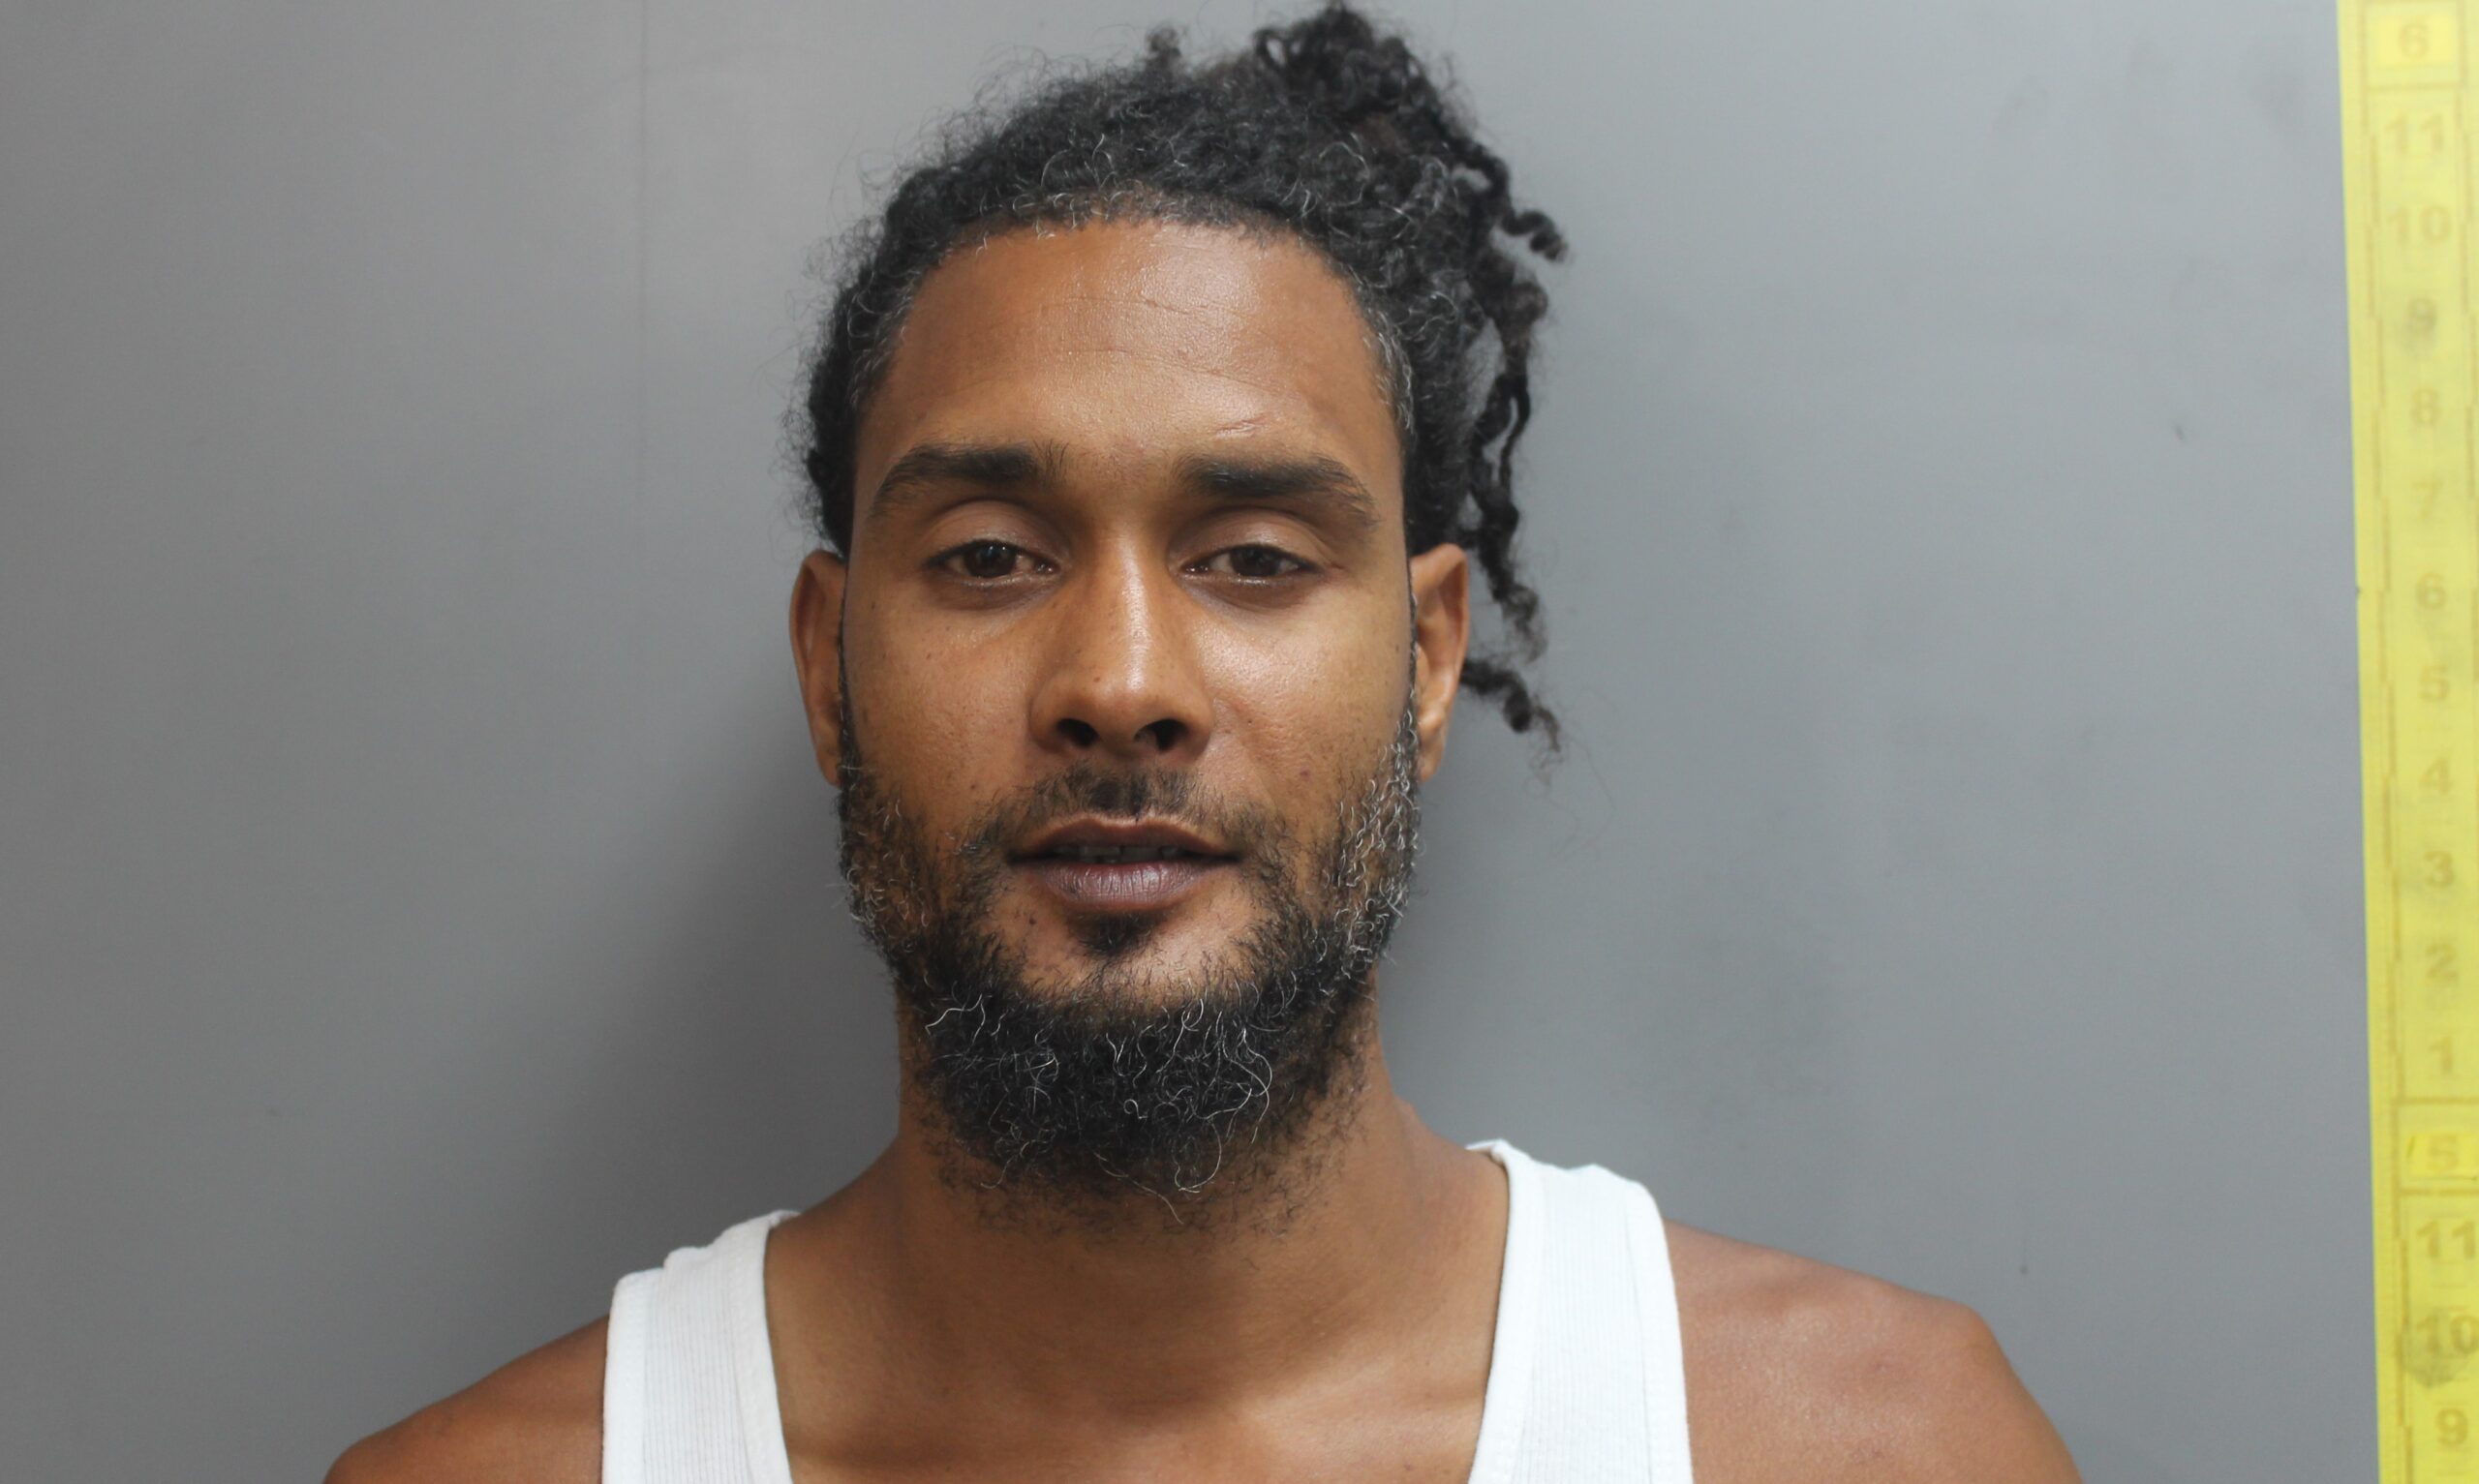 St. Croix Man Drinking In Bar With Loaded Gun At His Side Is Arrested By Police: VIPD